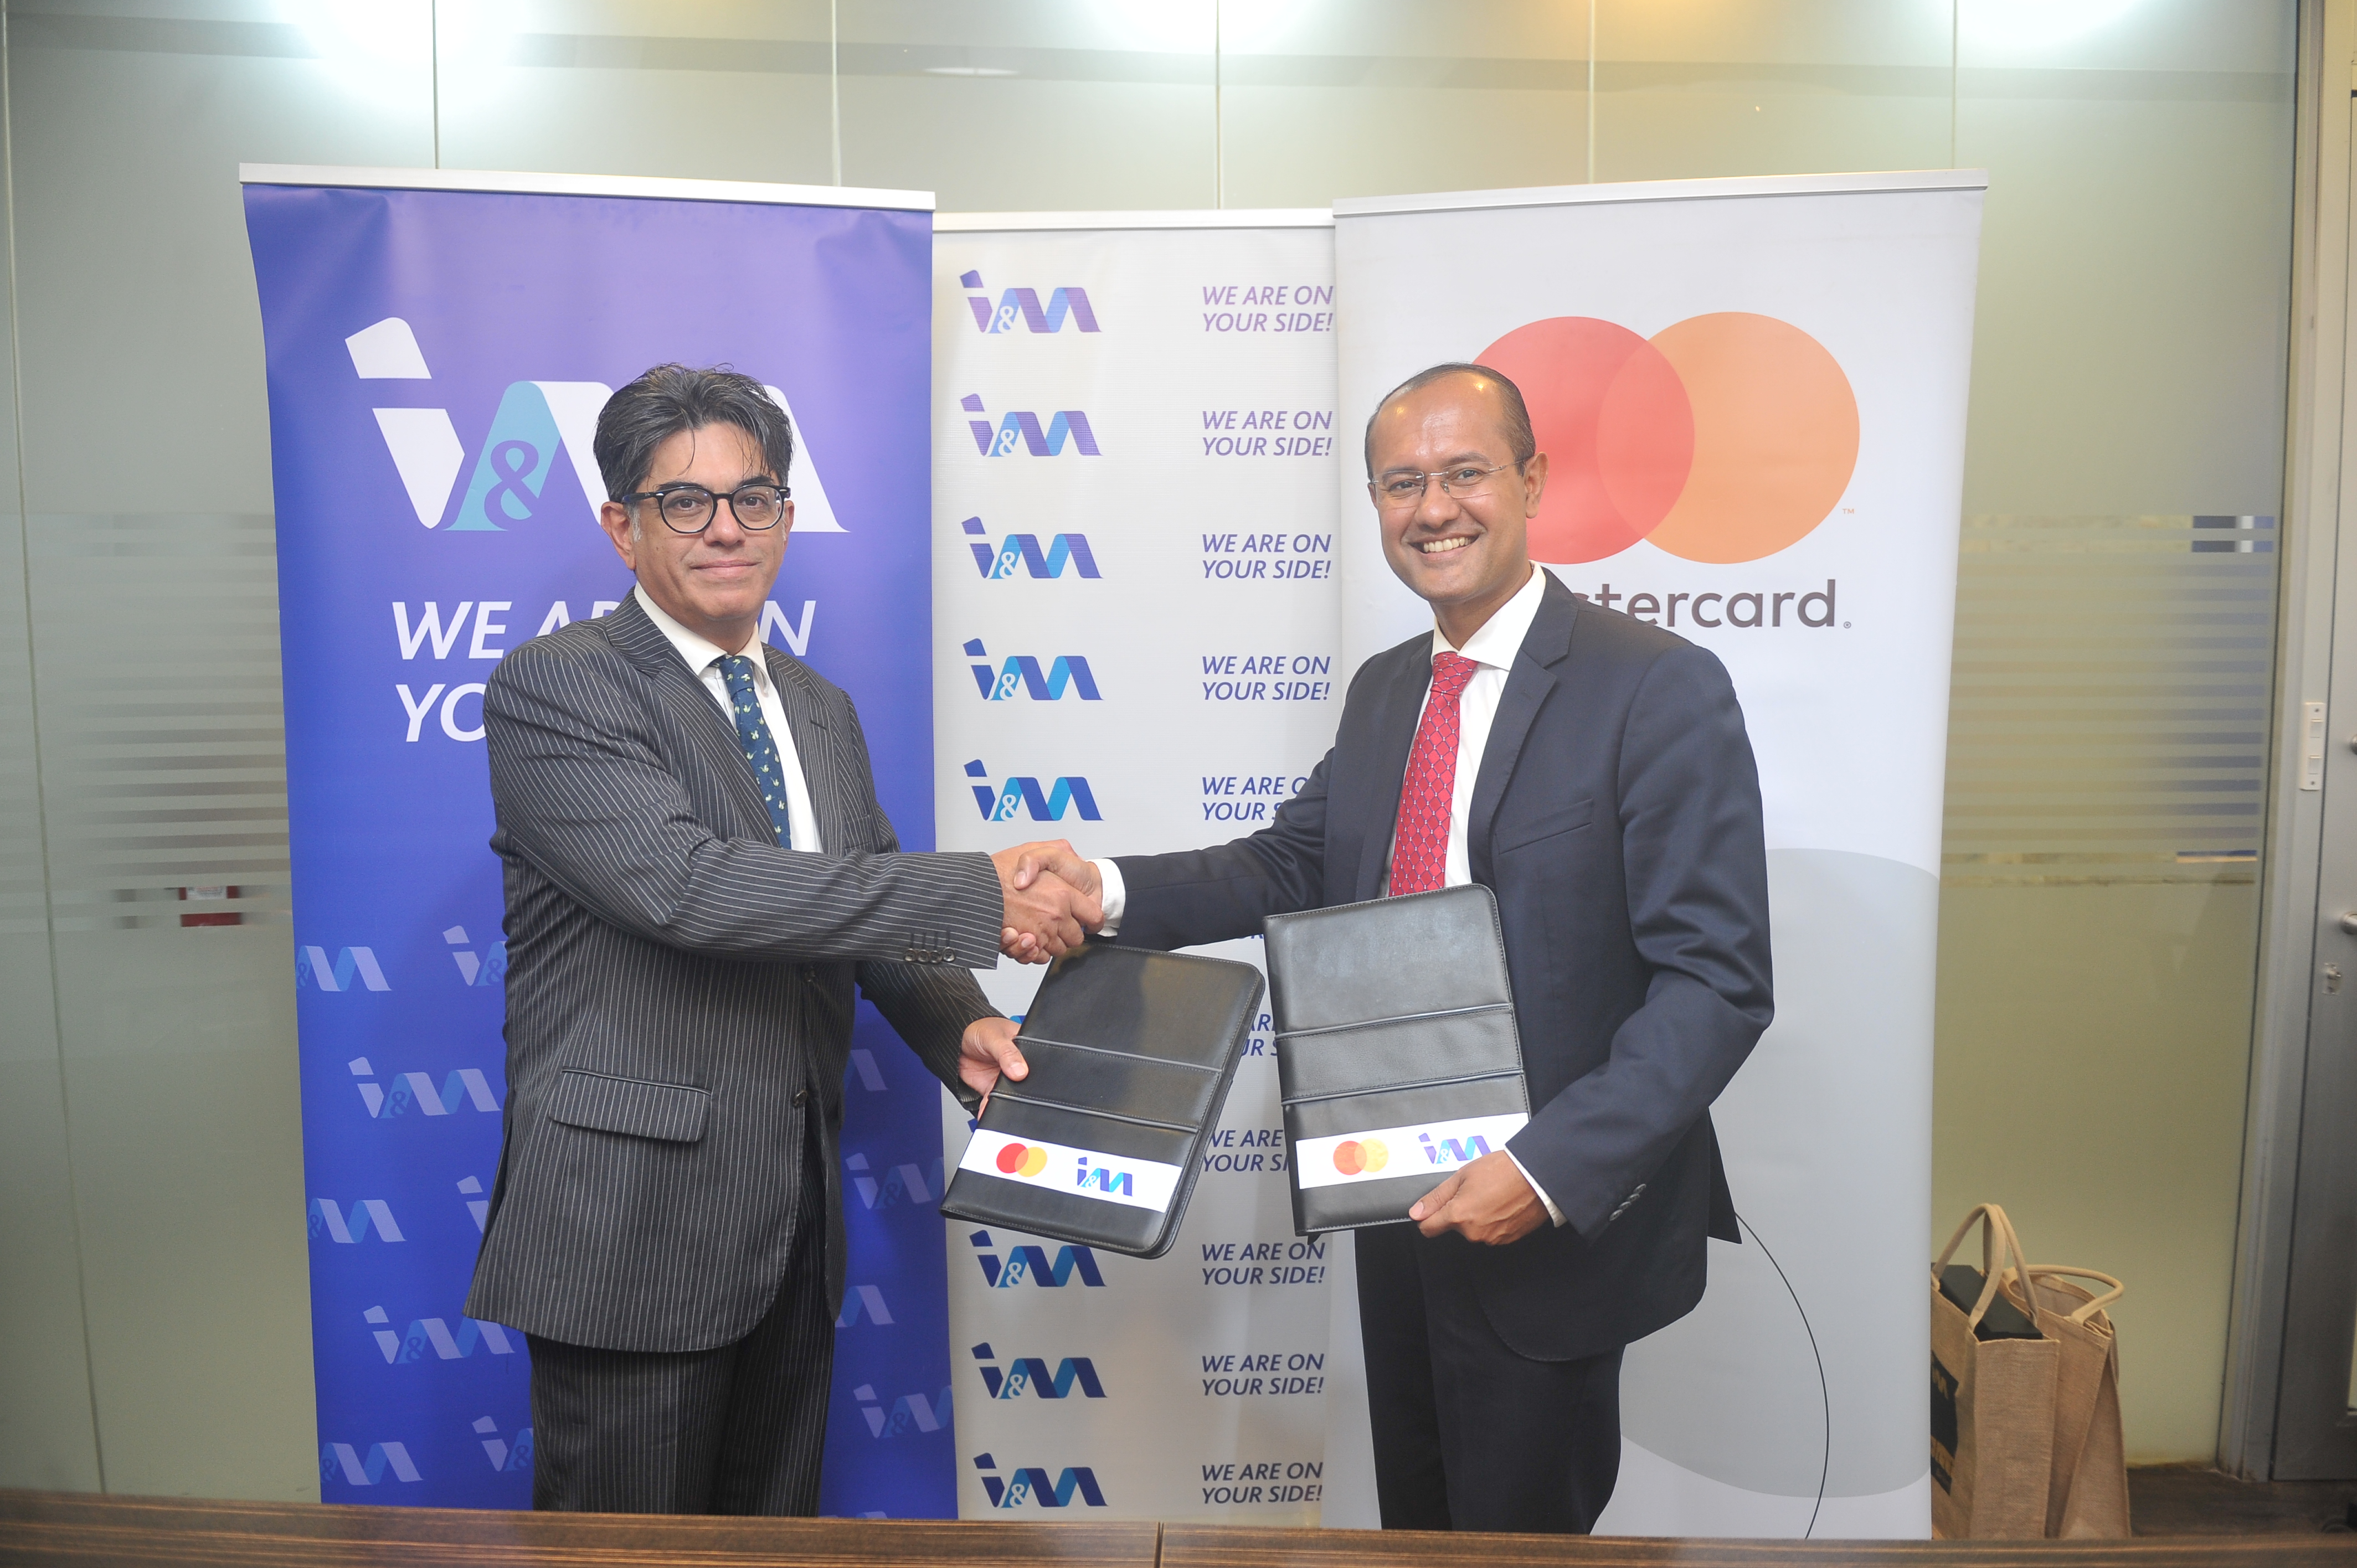 Photo caption: Zahid Mustafa, Chief Executive Officer for I&M Bank Tanzania (L) and Shehryar Ali, Country Manager for East Africa at Mastercard (R) sign agreement that will enable I&M Bank customers to make transactions using Mastercard Premium World Debit Card and Multicurrency Prepaid Cards